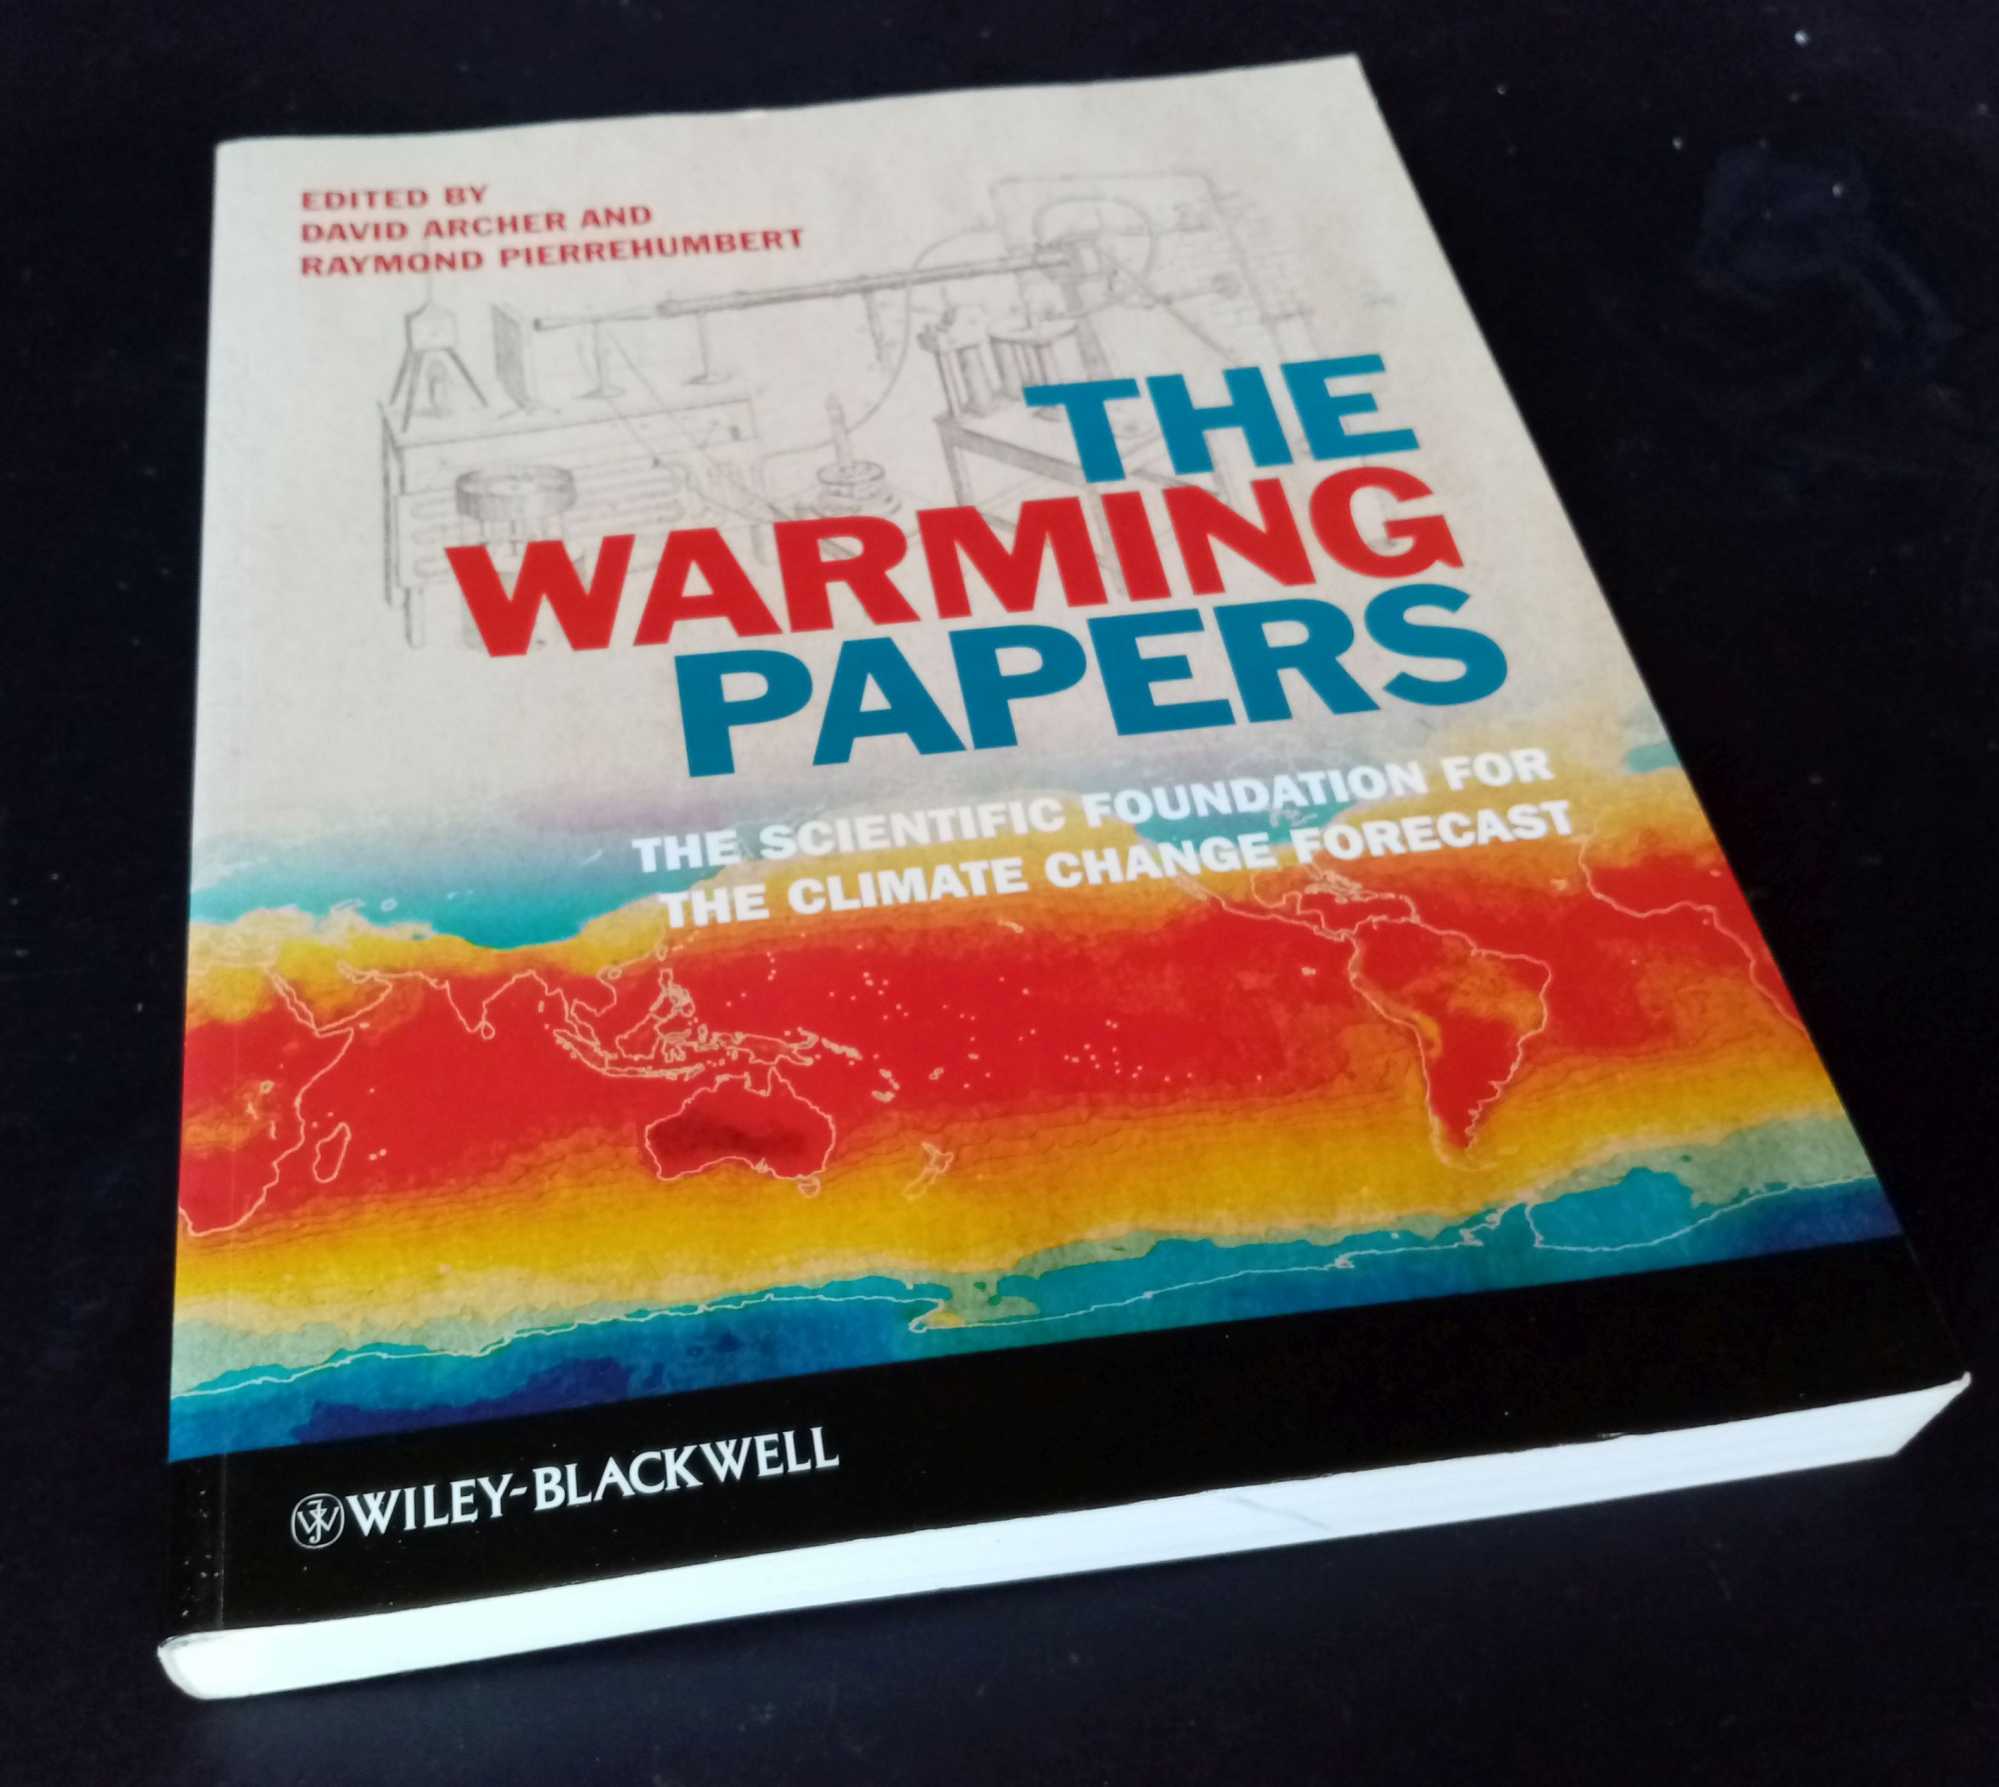 David Archer, ed. - The Warming Papers: The Scientific Foundation for the Climate Change Forecast